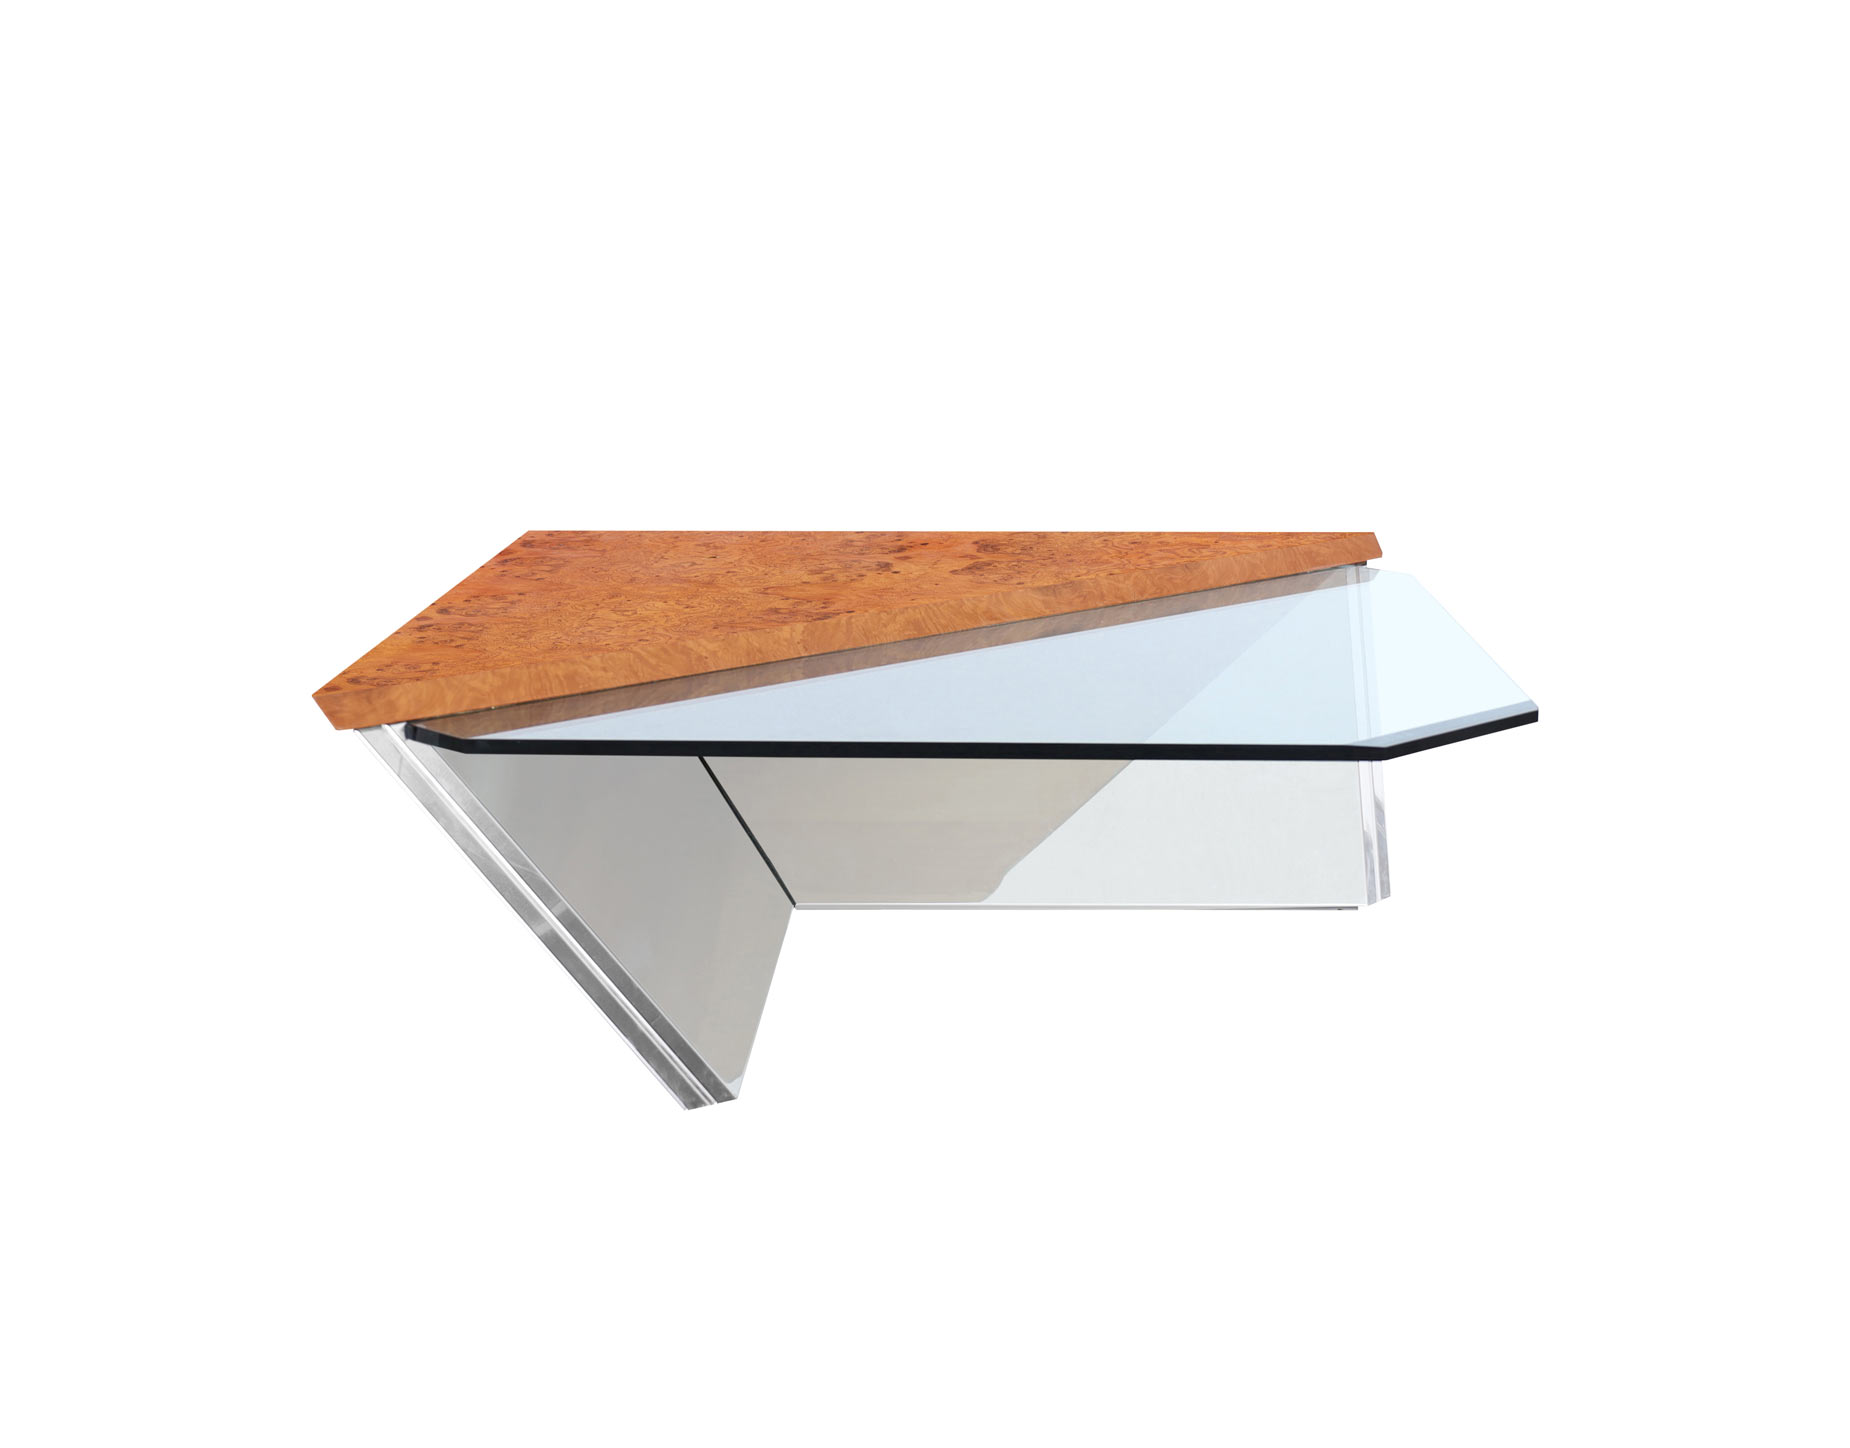 Vintage Stainless Steel Cantilevered Coffee Table Attributed to Brueton